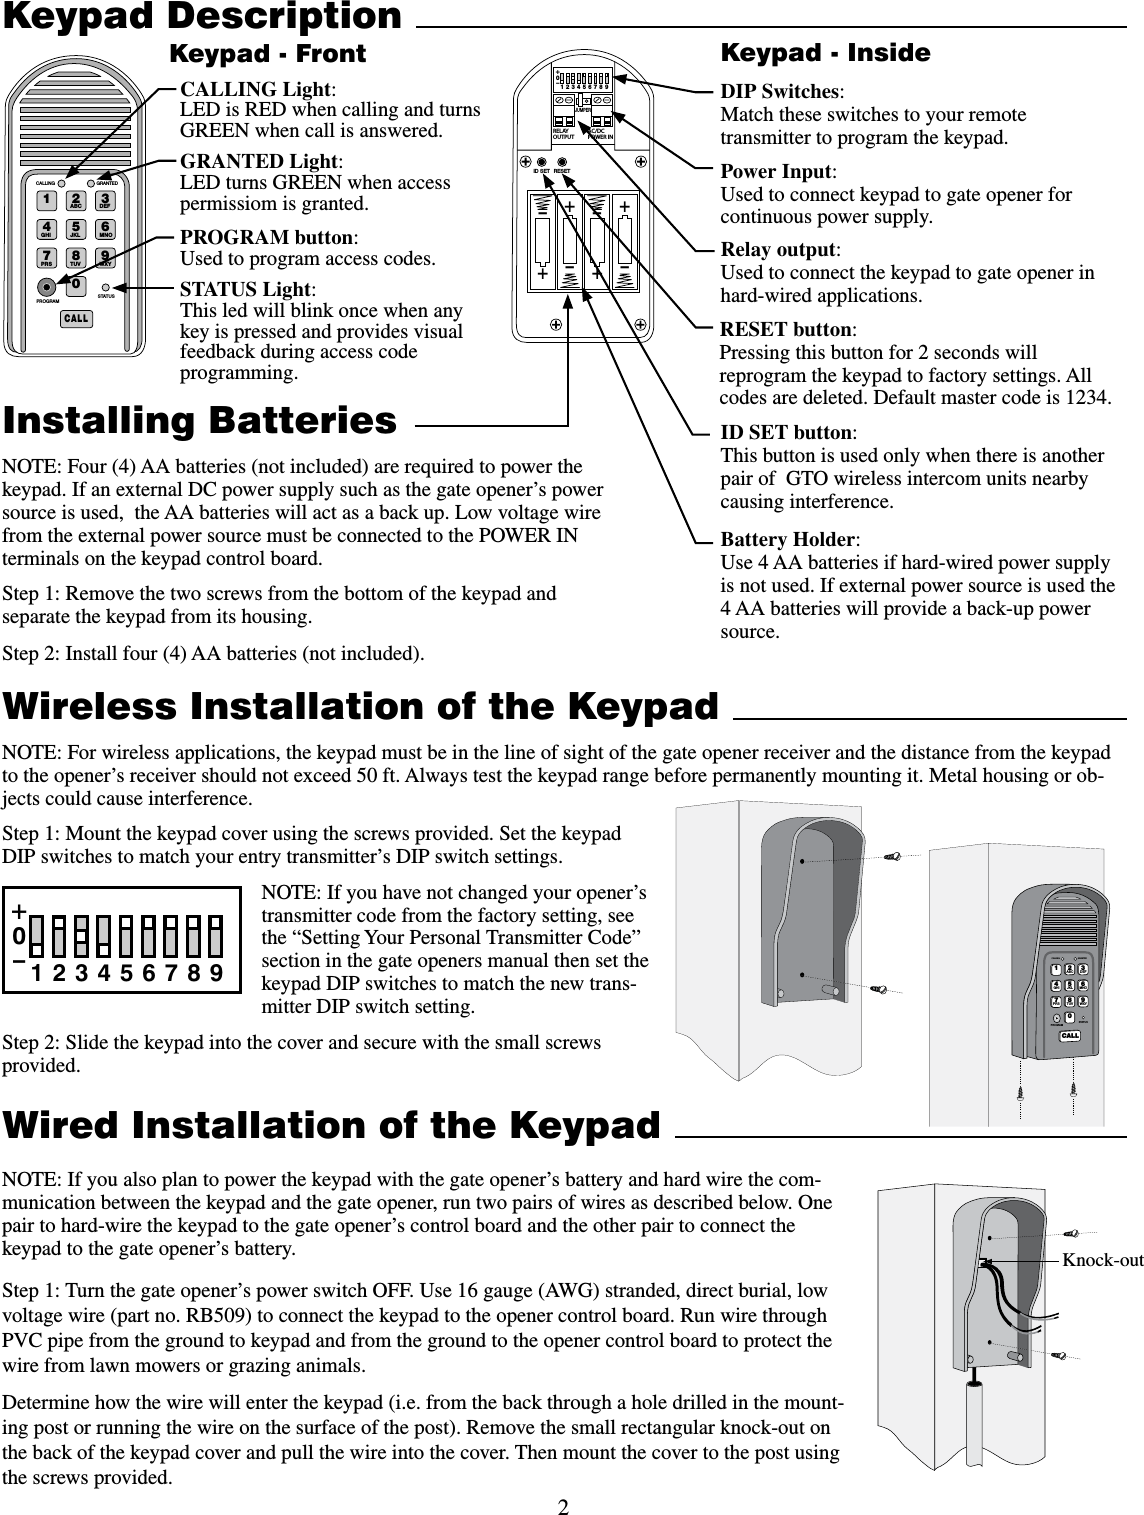 2Wired Installation of the Keypad NOTE: If you also plan to power the keypad with the gate opener’s battery and hard wire the com-munication between the keypad and the gate opener, run two pairs of wires as described below. One pair to hard-wire the keypad to the gate opener’s control board and the other pair to connect the keypad to the gate opener’s battery.Step 1: Turn the gate opener’s power switch OFF. Use 16 gauge (AWG) stranded, direct burial, low voltage wire (part no. RB509) to connect the keypad to the opener control board. Run wire through PVC pipe from the ground to keypad and from the ground to the opener control board to protect the wire from lawn mowers or grazing animals.Determine how the wire will enter the keypad (i.e. from the back through a hole drilled in the mount-ing post or running the wire on the surface of the post). Remove the small rectangular knock-out on the back of the keypad cover and pull the wire into the cover. Then mount the cover to the post using the screws provided.Keypad DescriptionInstalling BatteriesNOTE: Four (4) AA batteries (not included) are required to power the keypad. If an external DC power supply such as the gate opener’s power source is used,  the AA batteries will act as a back up. Low voltage wire from the external power source must be connected to the POWER IN terminals on the keypad control board.    Step 1: Remove the two screws from the bottom of the keypad and separate the keypad from its housing.Step 2: Install four (4) AA batteries (not included).  &quot;#$%&amp;&apos;()*+,-./013456789:$&quot;--45&quot;564130(3&quot;.$&quot;--*/( (3&quot;/5&amp;%STATUS Light:This led will blink once when any key is pressed and provides visual feedback during access code programming.GRANTED Light:LED turns GREEN when access permissiom is granted.Keypad - FrontBattery Holder:Use 4 AA batteries if hard-wired power supply is not used. If external power source is used the 4 AA batteries will provide a back-up power source. 2%,!9/54054!#$#0/7%2).o*%4&amp;5oooo3&amp;4&amp;5+6.1&amp;3ID SET button:This button is used only when there is another pair of  GTO wireless intercom units nearby causing interference. DIP Switches:Match these switches to your remote transmitter to program the keypad.Relay output:Used to connect the keypad to gate opener in hard-wired applications.Power Input:Used to connect keypad to gate opener for continuous power supply.Keypad - InsideKnock-outWireless Installation of the KeypadNOTE: For wireless applications, the keypad must be in the line of sight of the gate opener receiver and the distance from the keypad to the opener’s receiver should not exceed 50 ft. Always test the keypad range before permanently mounting it. Metal housing or ob-jects could cause interference. Step 1: Mount the keypad cover using the screws provided. Set the keypad DIP switches to match your entry transmitter’s DIP switch settings. NOTE: If you have not changed your opener’s transmitter code from the factory setting, see the “Setting Your Personal Transmitter Code” section in the gate openers manual then set the keypad DIP switches to match the new trans-mitter DIP switch setting.Step 2: Slide the keypad into the cover and secure with the small screws provided. 12ABC 3DEF4GHI 5JKL 6MNO7PRS 8TUV 9WXY0CALLSTATUSPROGRAMCALLING GRANTED123456789+0–PROGRAM button:Used to program access codes.CALLING Light:LED is RED when calling and turns GREEN when call is answered.RESET button:Pressing this button for 2 seconds will reprogram the keypad to factory settings. All codes are deleted. Default master code is 1234.